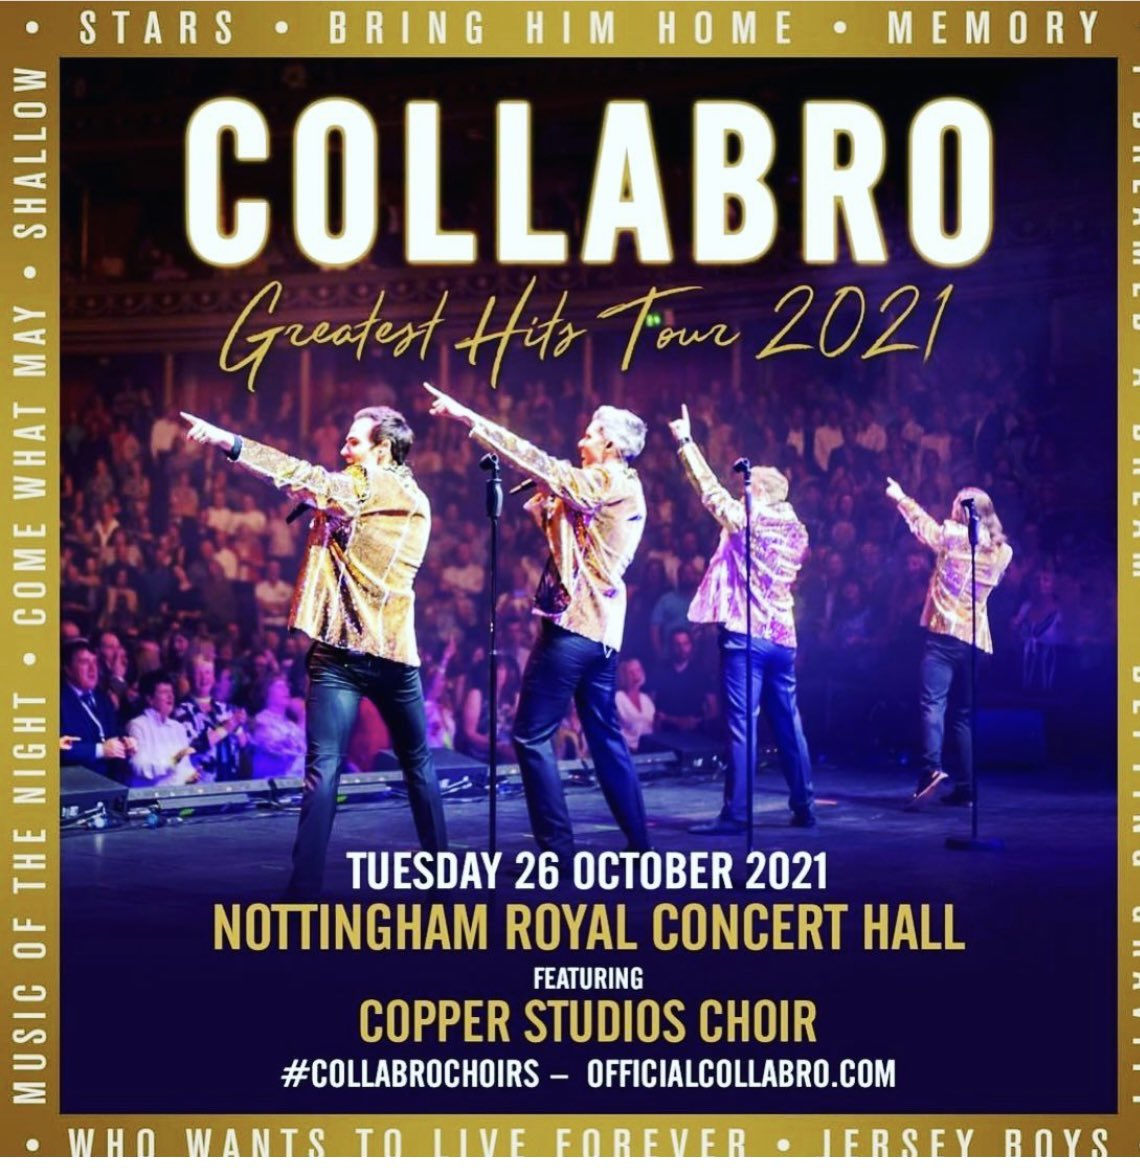 Excited to be performing with @Collabro @RoyalNottingham this evening as part of the @copperstudios_ choir #singer #collabro #collabrochoirs #nottingham #concert